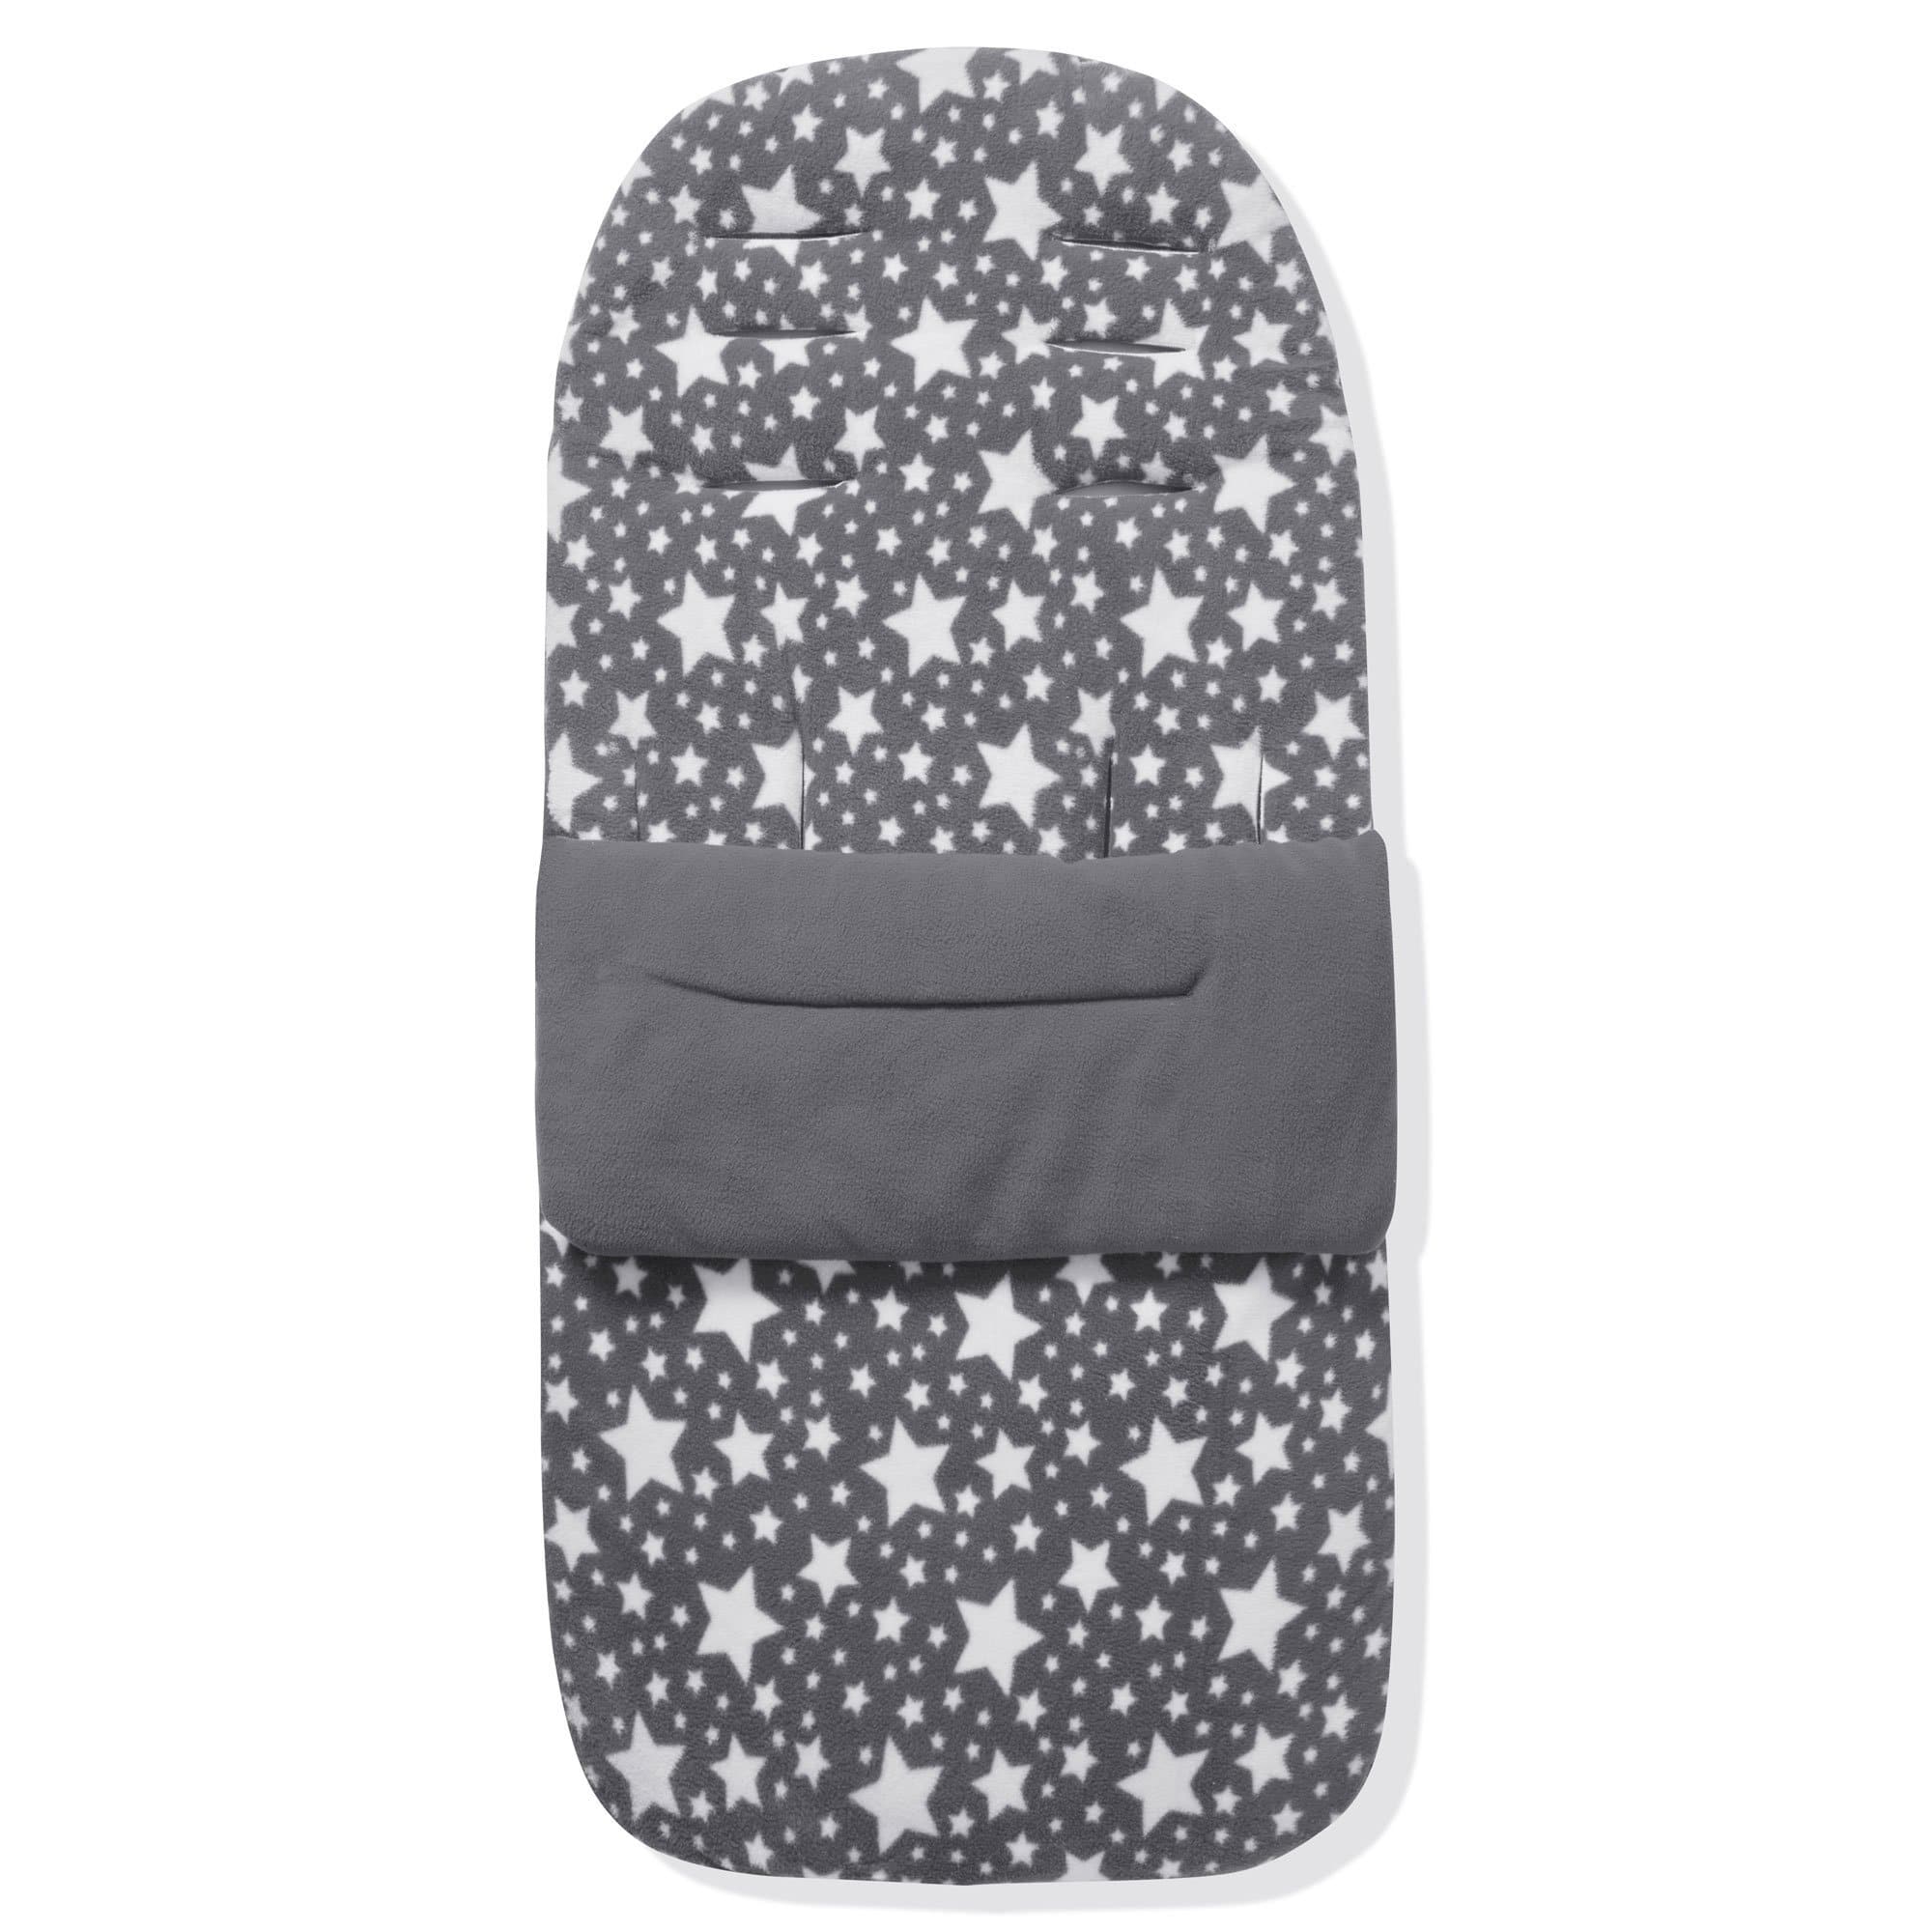 Fleece Footmuff / Cosy Toes Compatible With Brio - Grey Star / Fits All Models | For Your Little One